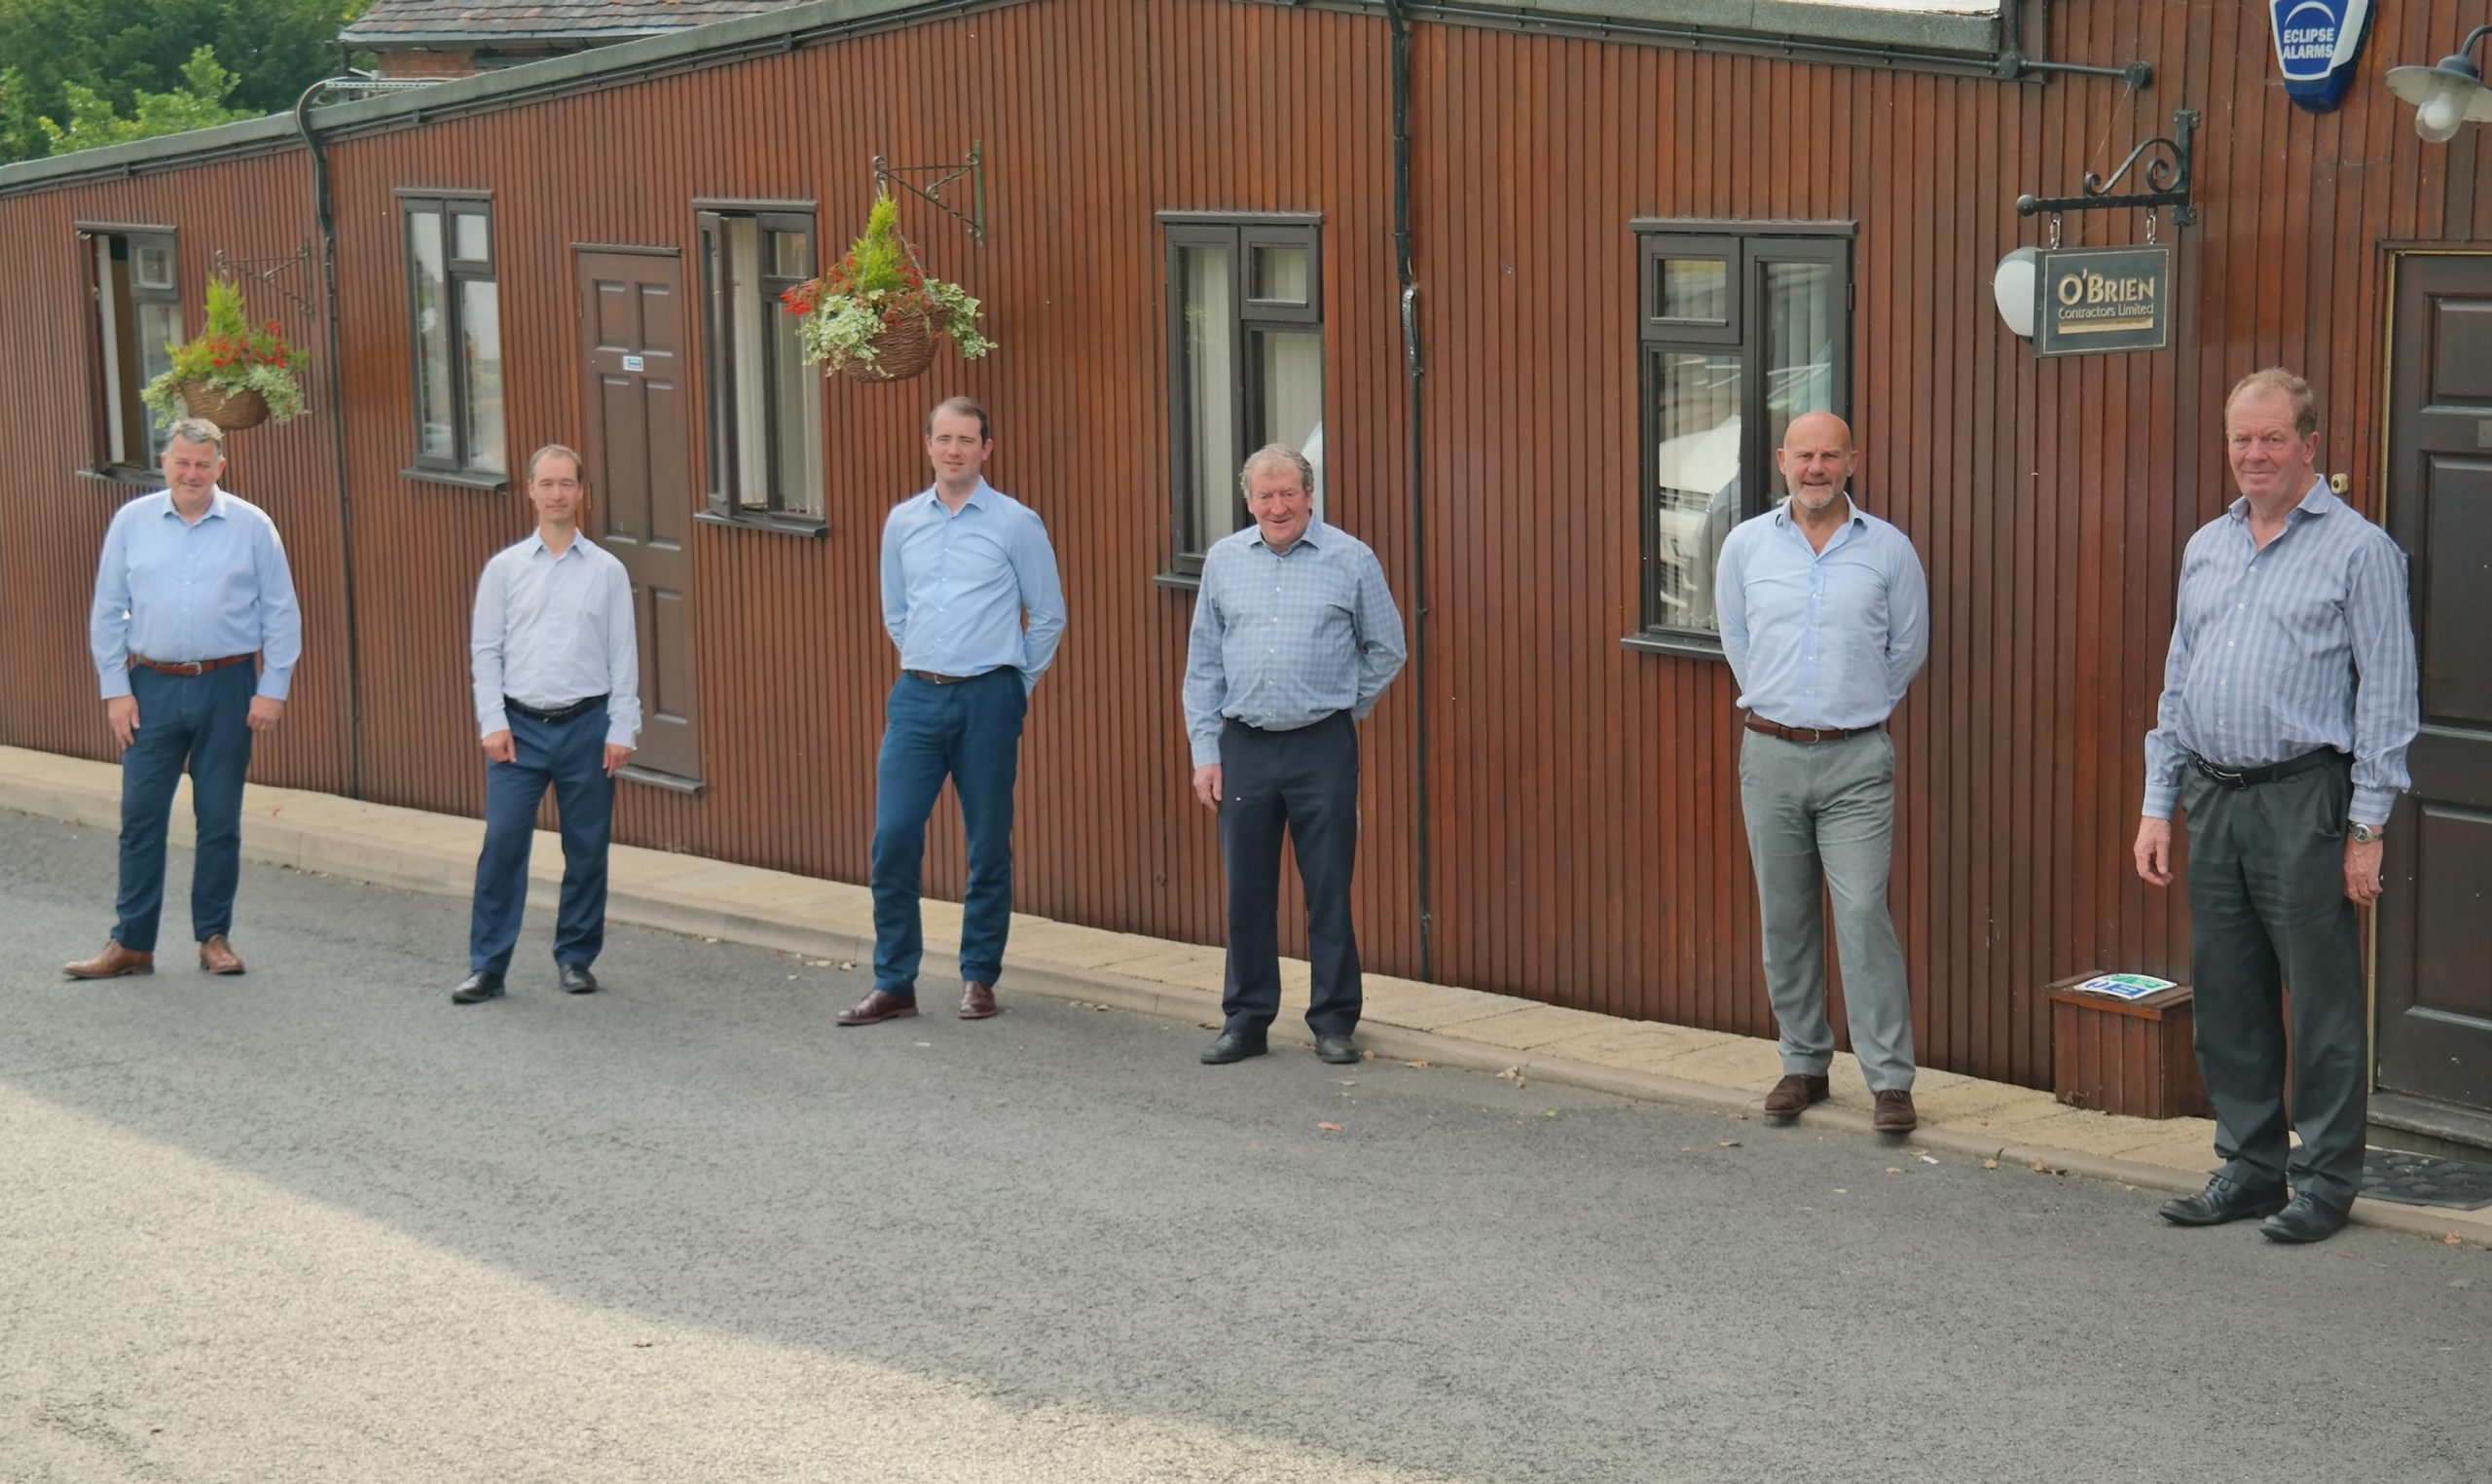 Excitement at O’Brien Contractors as 3 New Directors are Announced